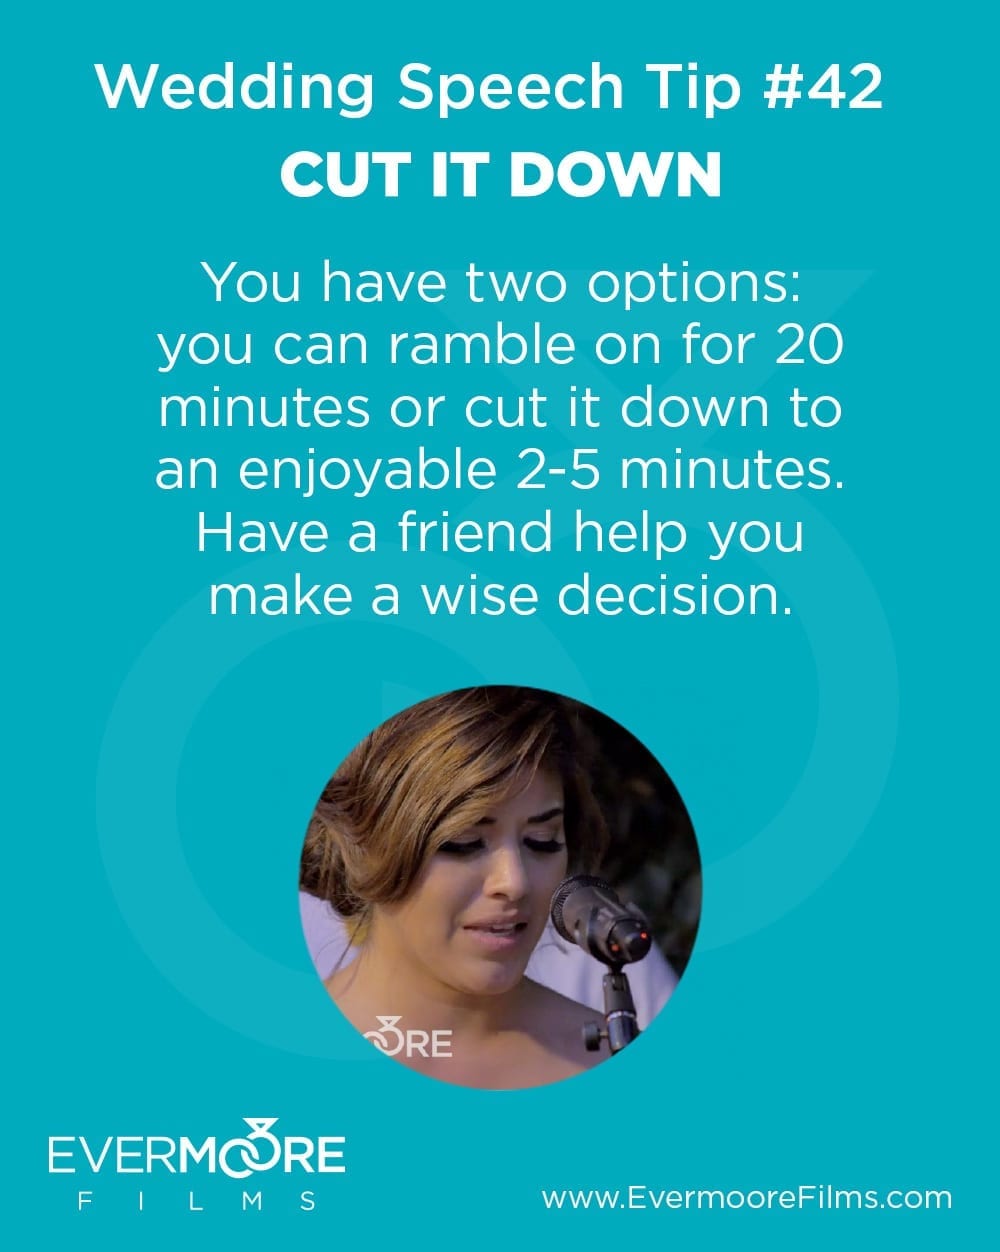 Cut it Down | Wedding Speech Tip | Evermoore FIlms | You have two options: you can ramble on for 20 minutes or cut it down to an enjoyable 2-5 minutes. Have a friend help you make a wise decision. 